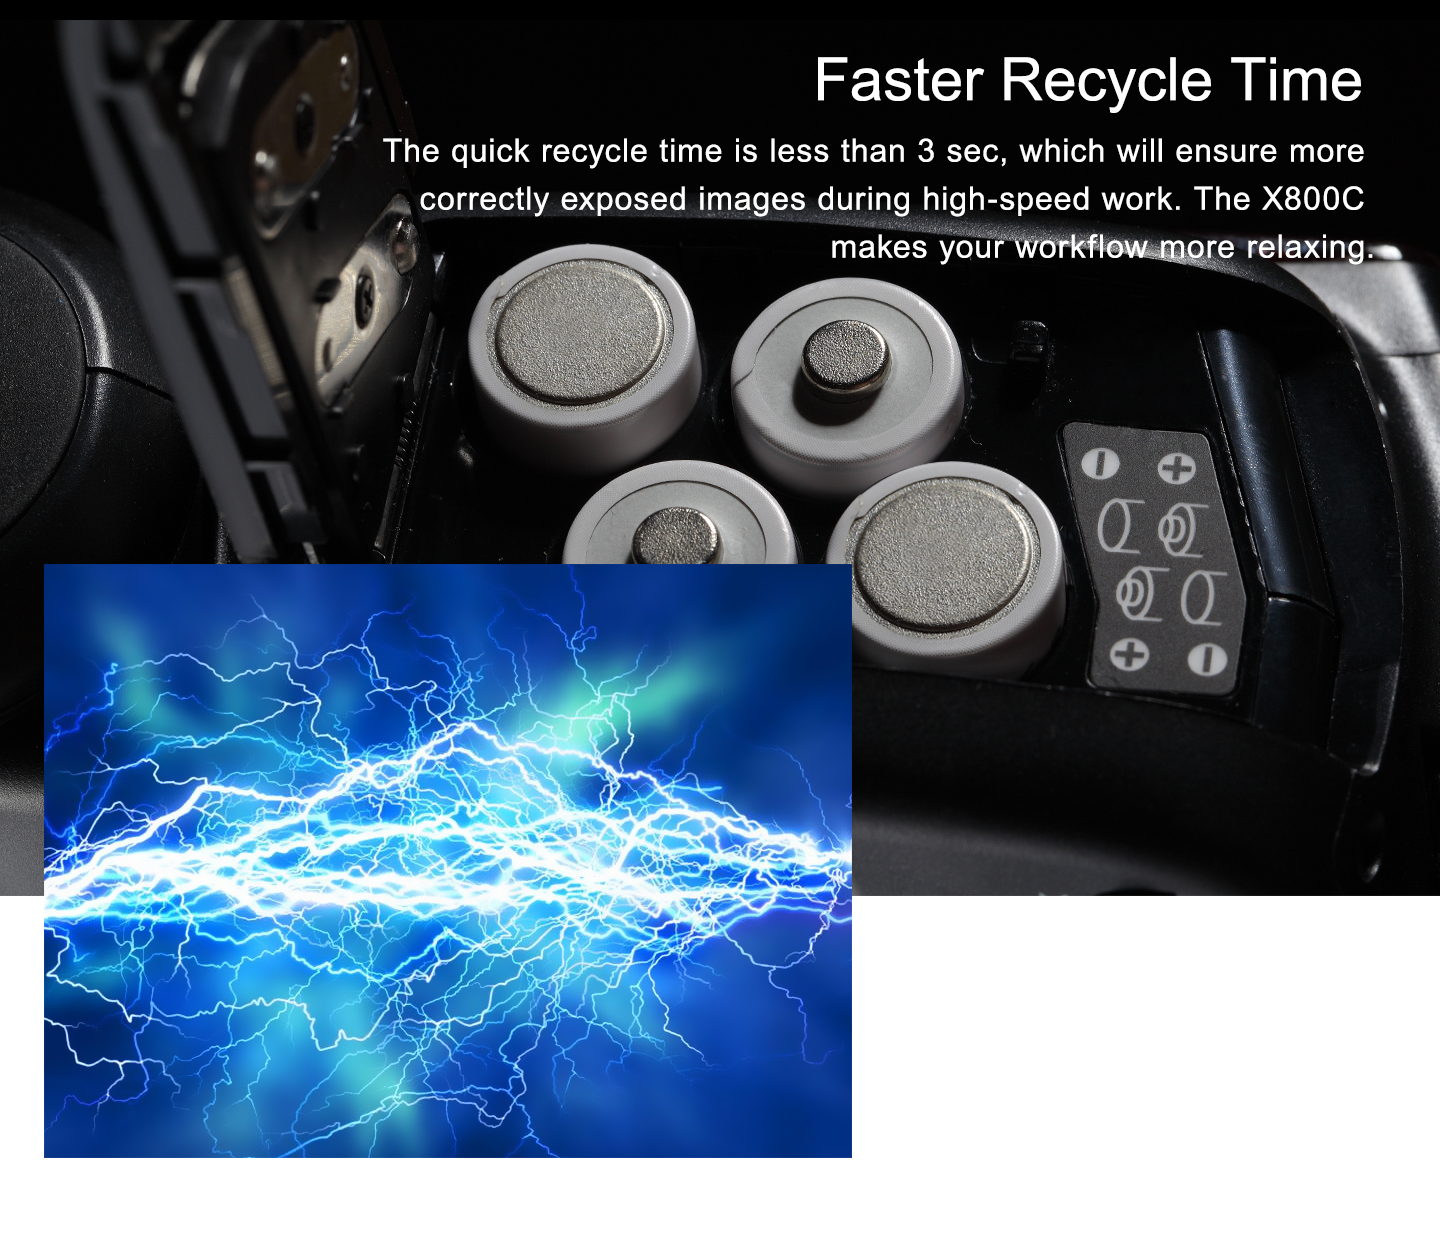 Faster Recycle Time